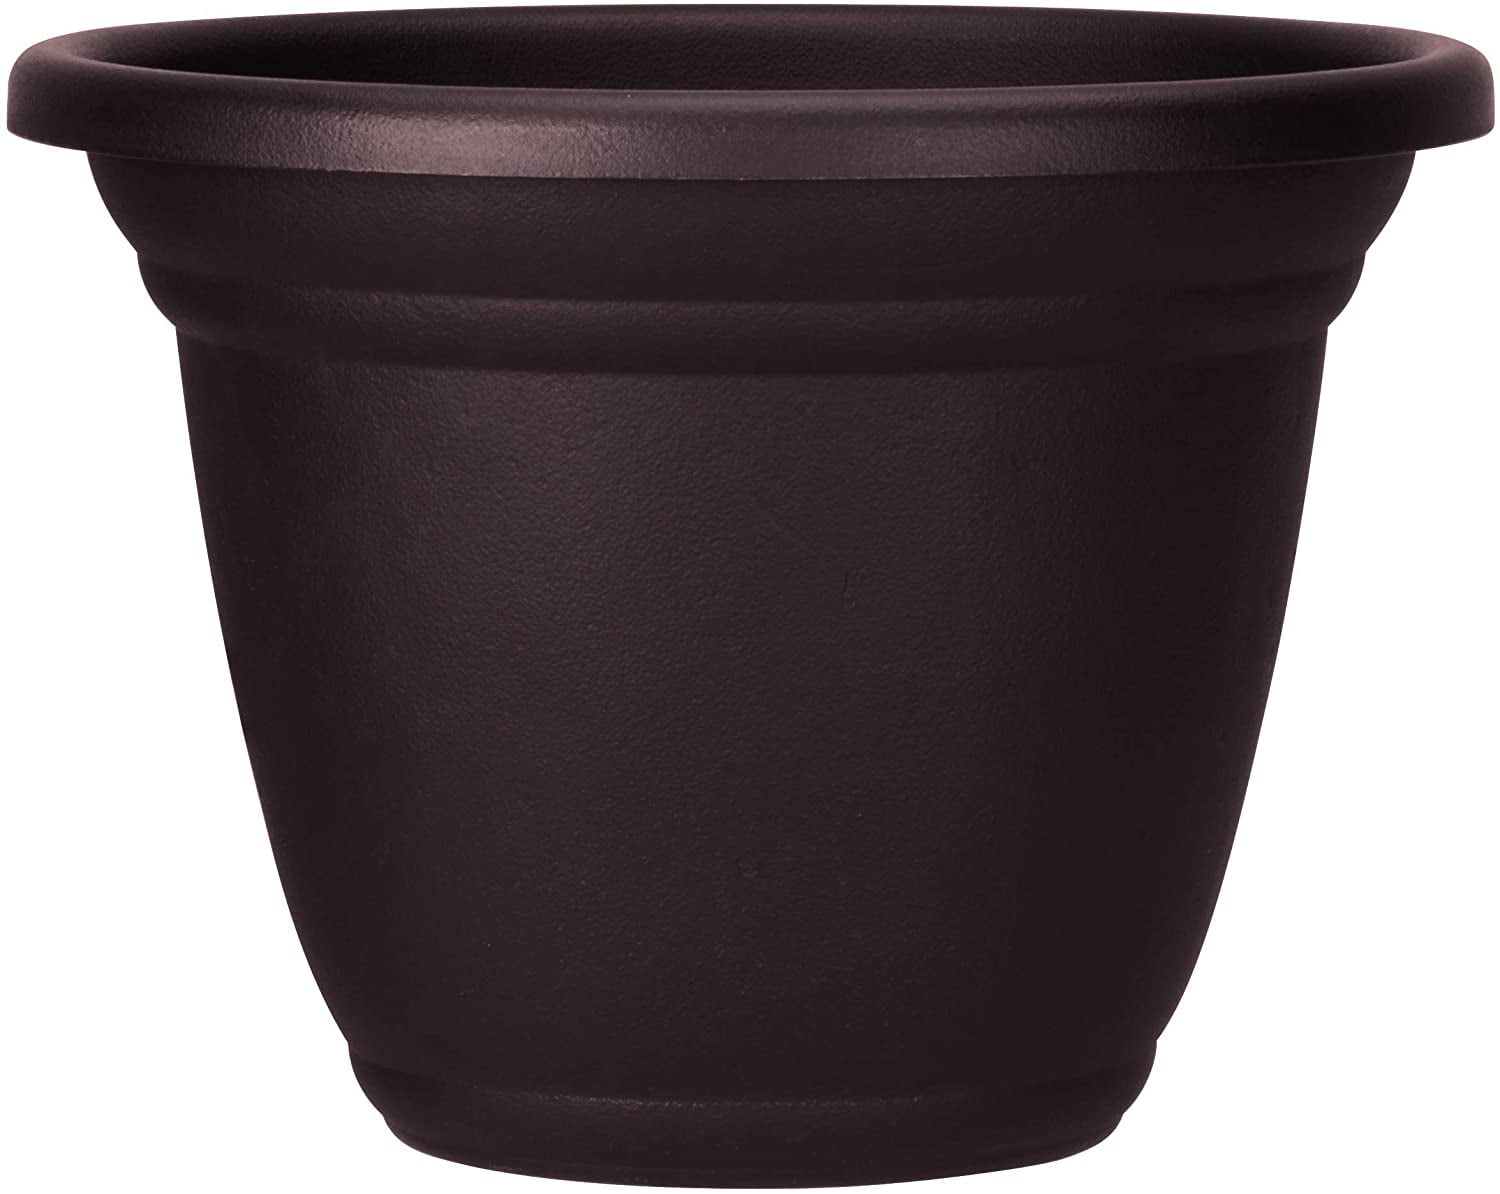 Chocolate The HC Companies 24 Inch Indoor and Outdoor Classic Durable Plastic Flower Pot Container Garden Planter with Molded Rim and Drainage Holes 